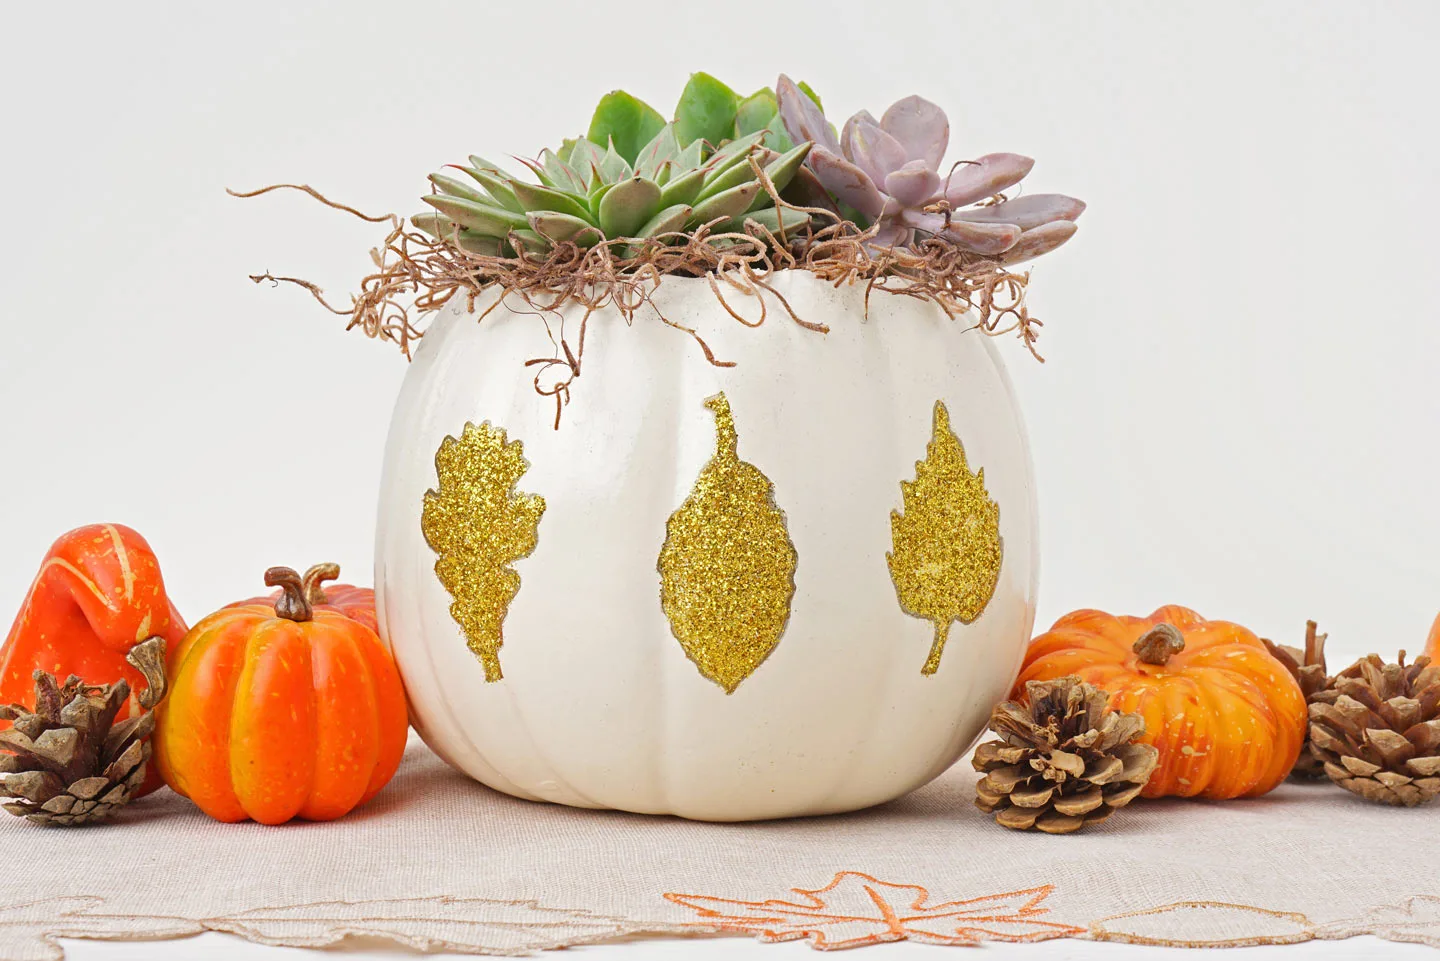 How to Make a Succulent Pumpkin Centerpiece For Your Fall Table